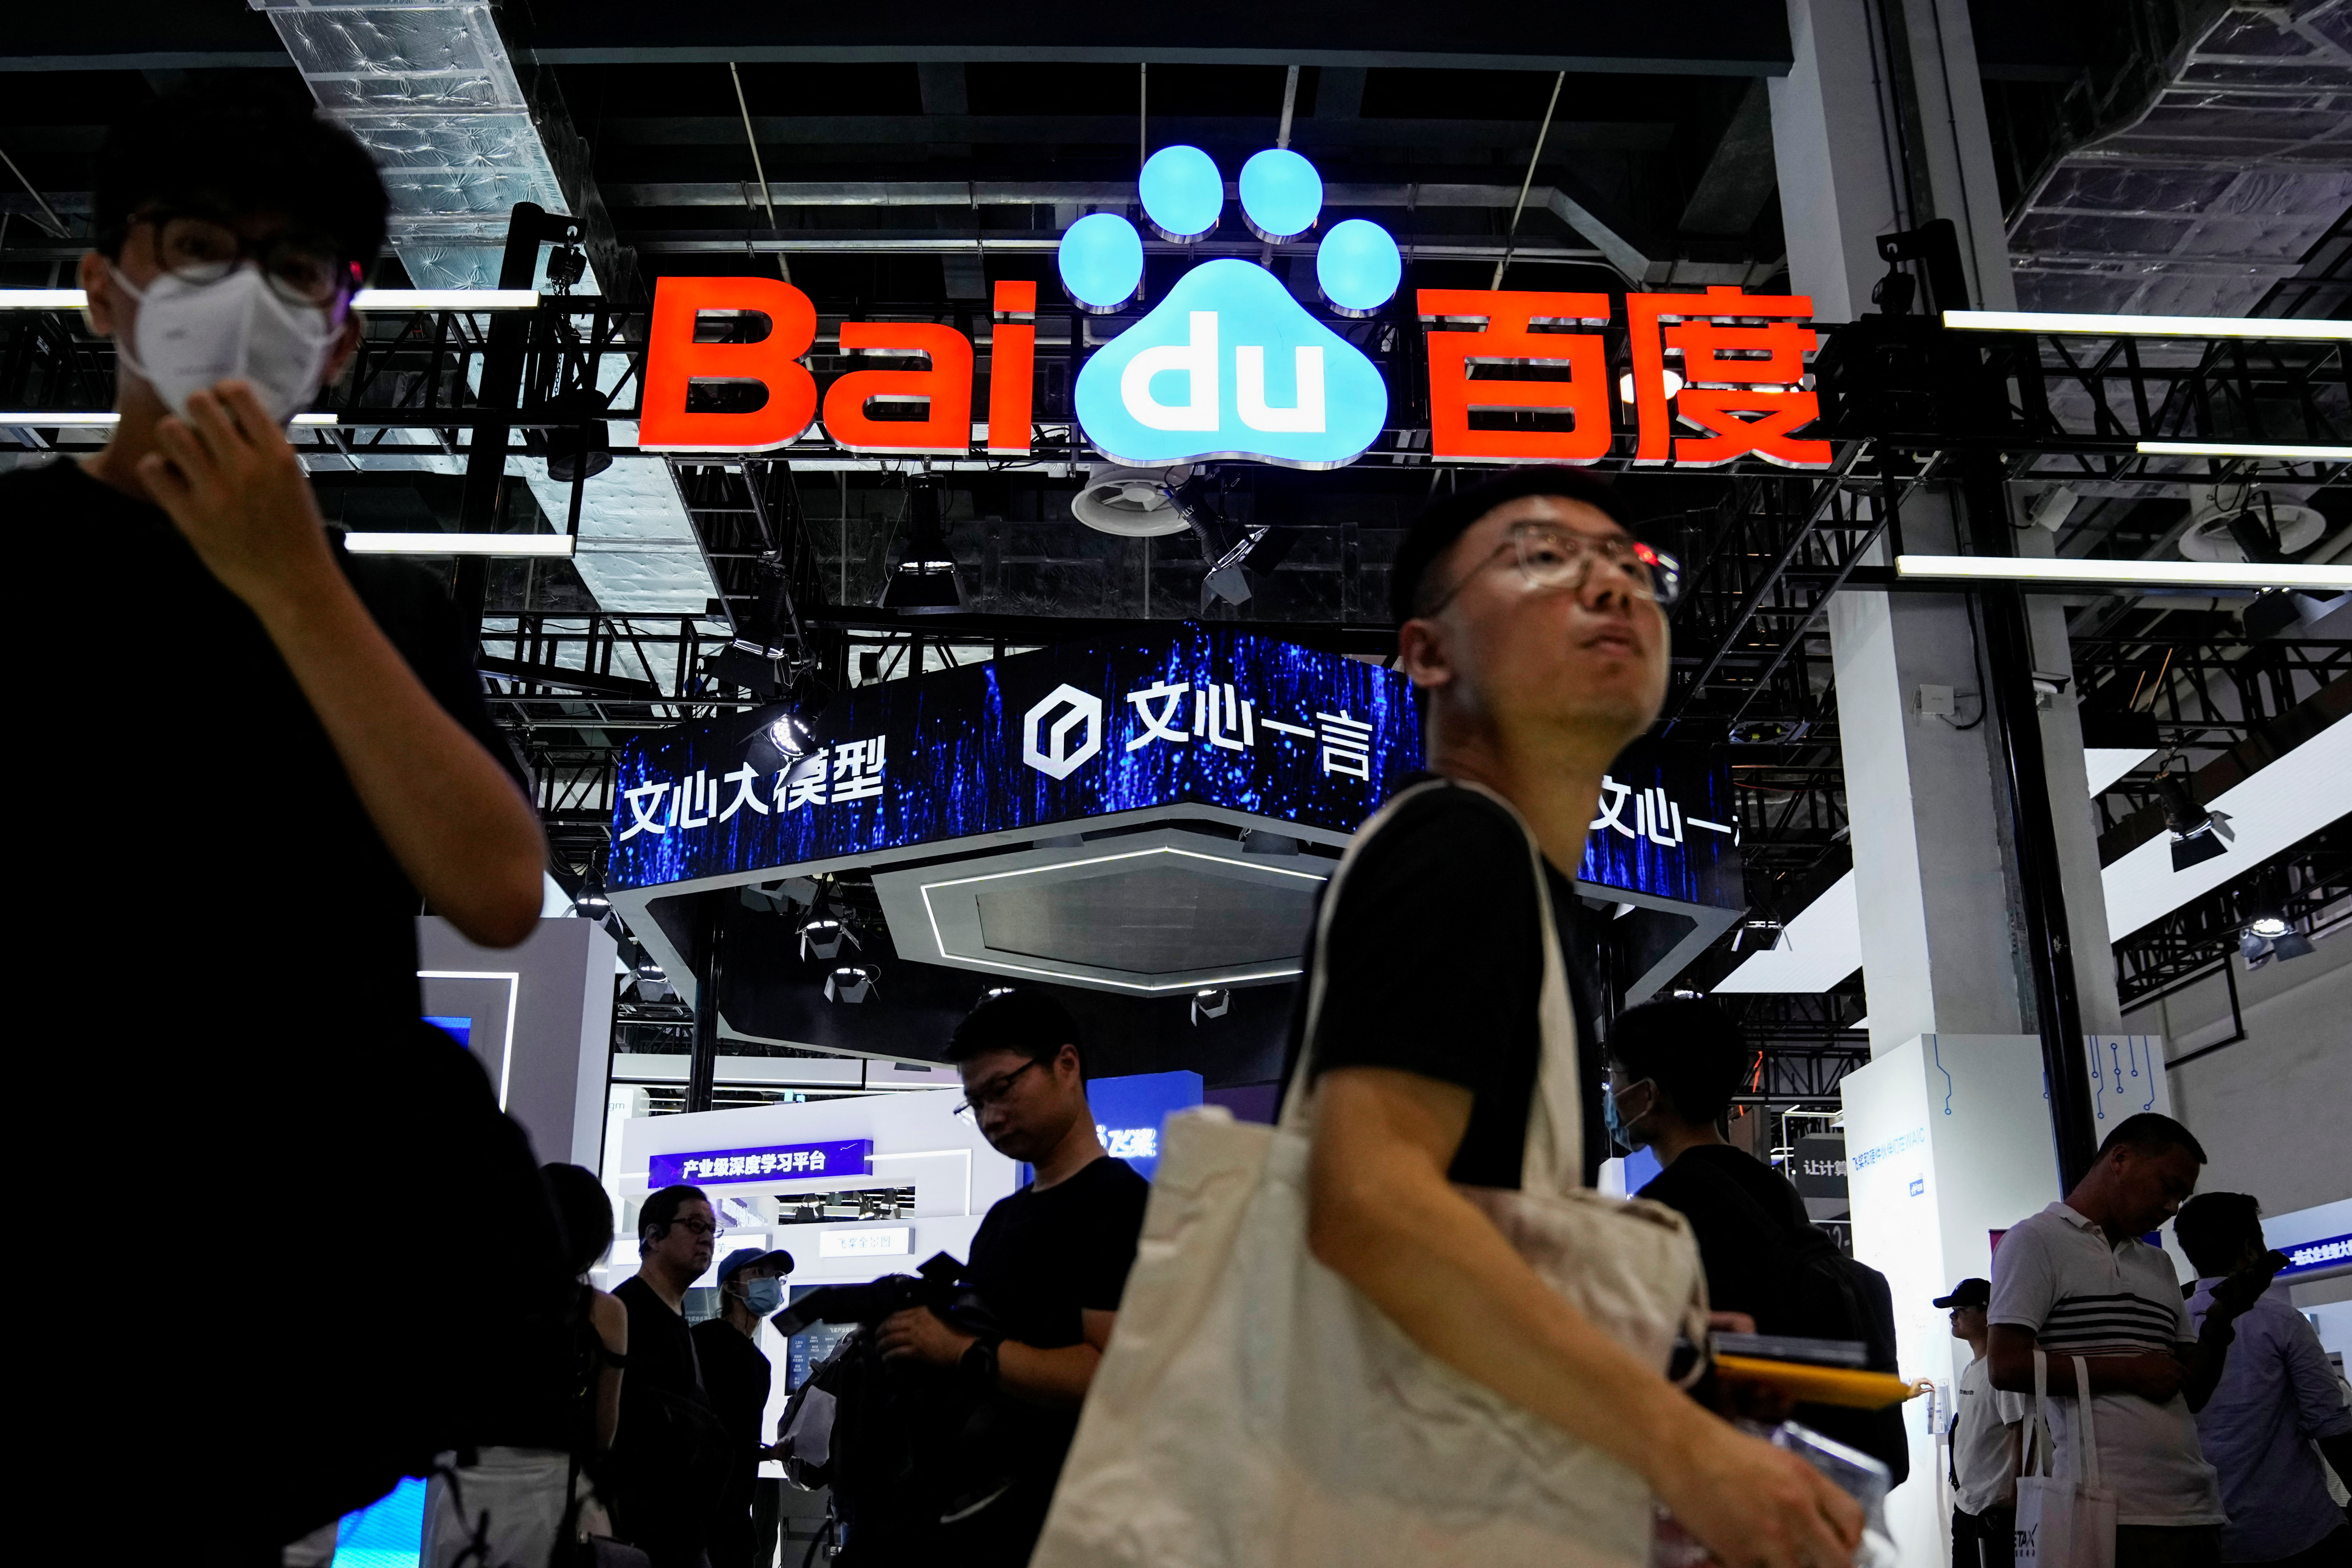 The Baidu brand appears at the World Artificial Intelligence Conference (WAIC) in Shanghai